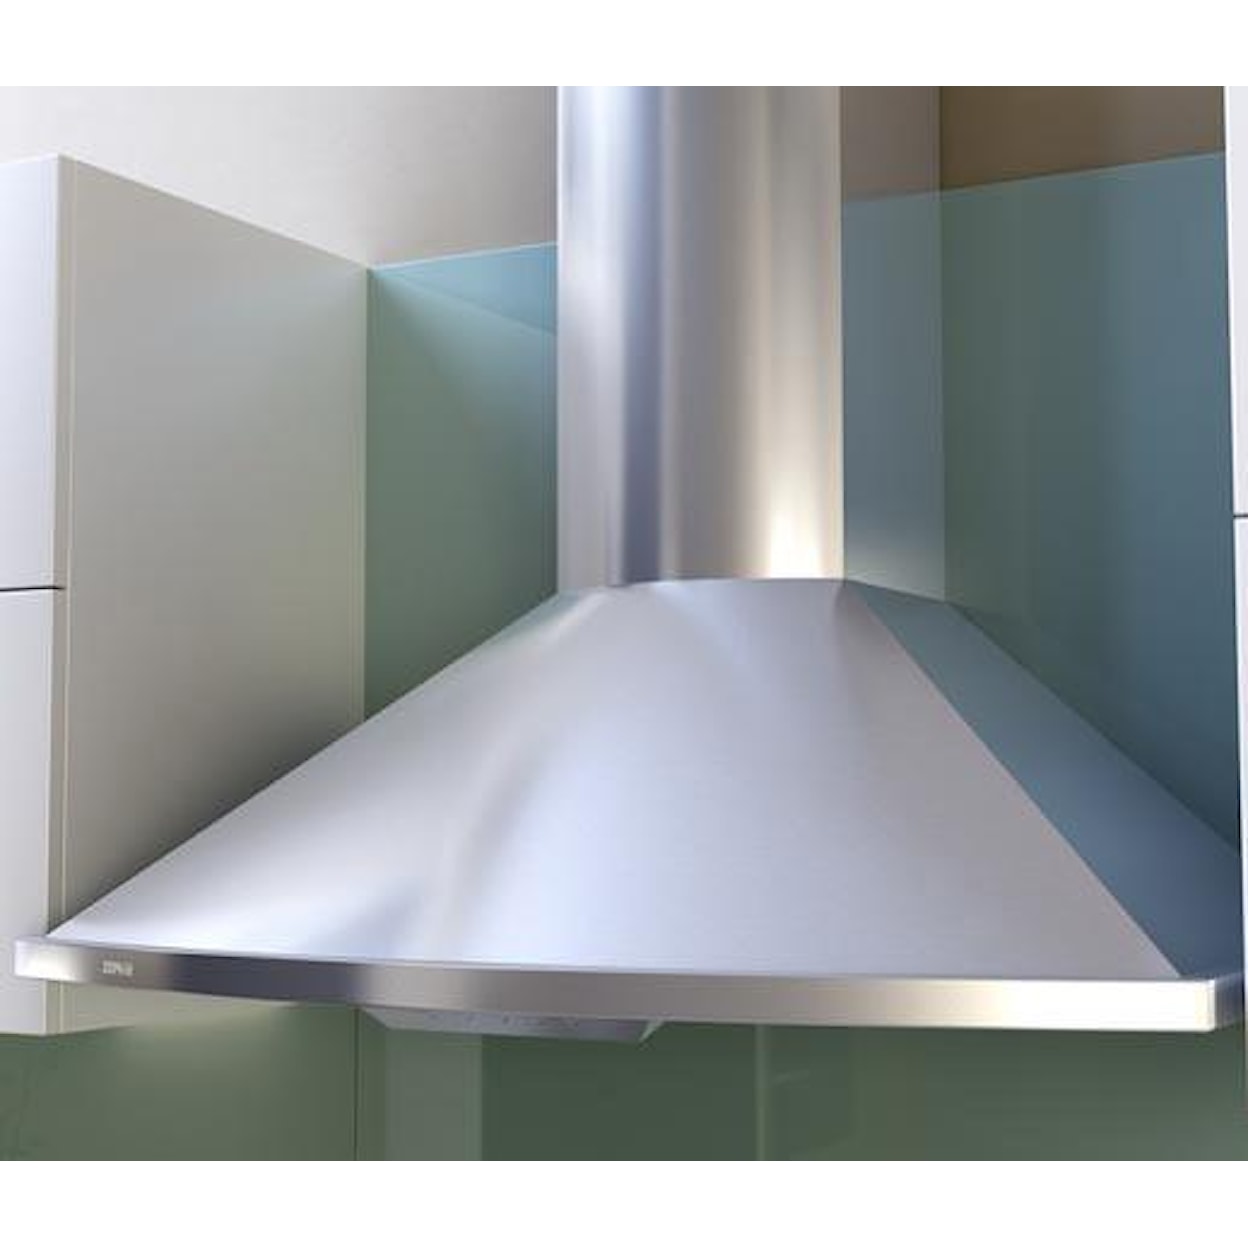 Zephyr Essentials Collection- Chimney Wall and Downdraft 30" Wall-Mount Range Hood 